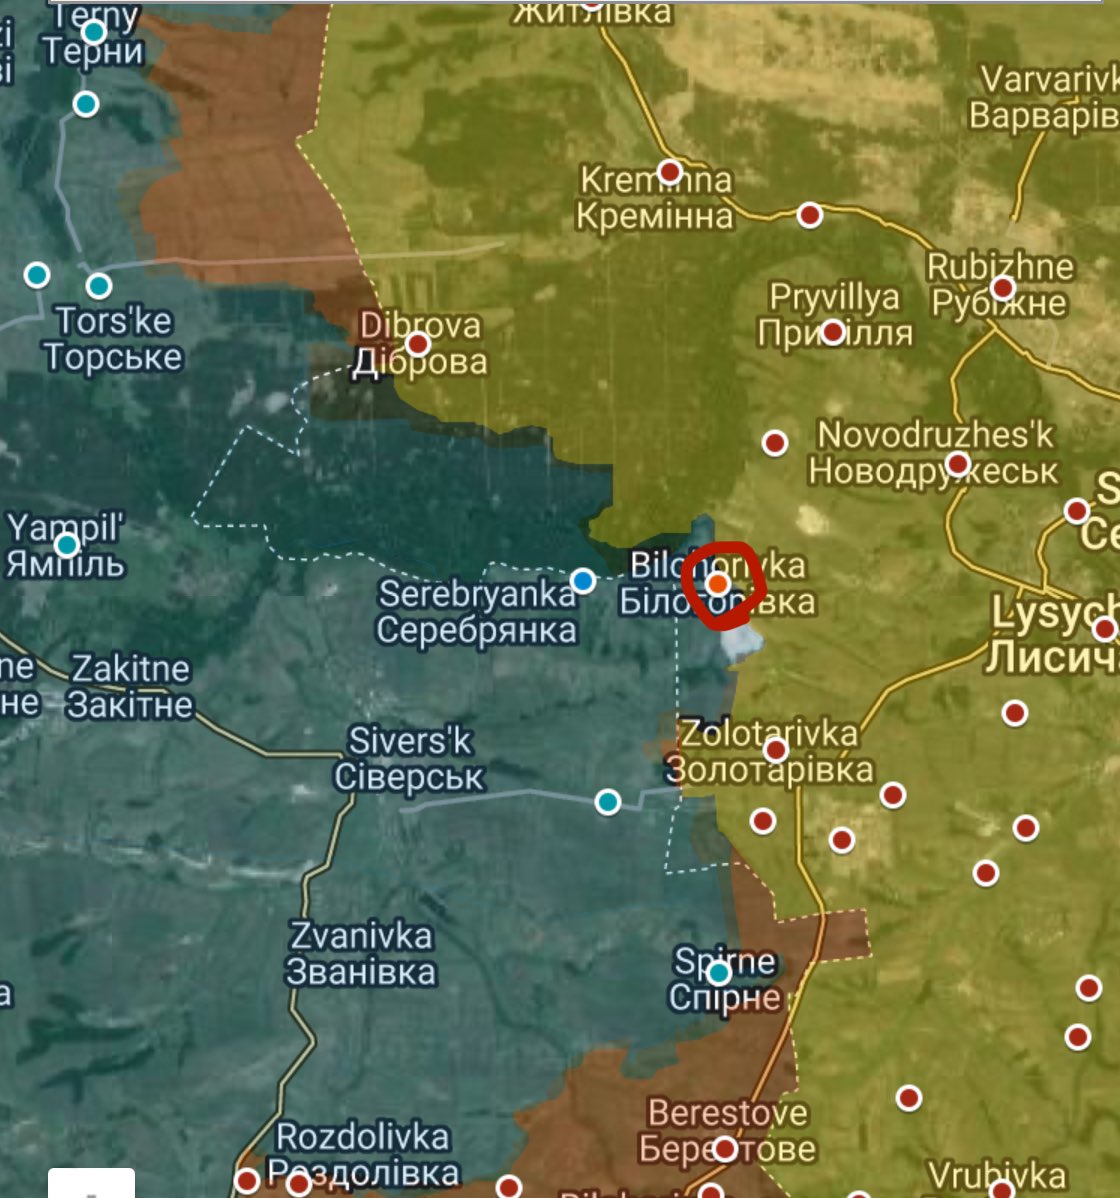 Russia captured Bilogorivka - defensive strongpoint on the Siversk salient that they had defended with great success for over a year.